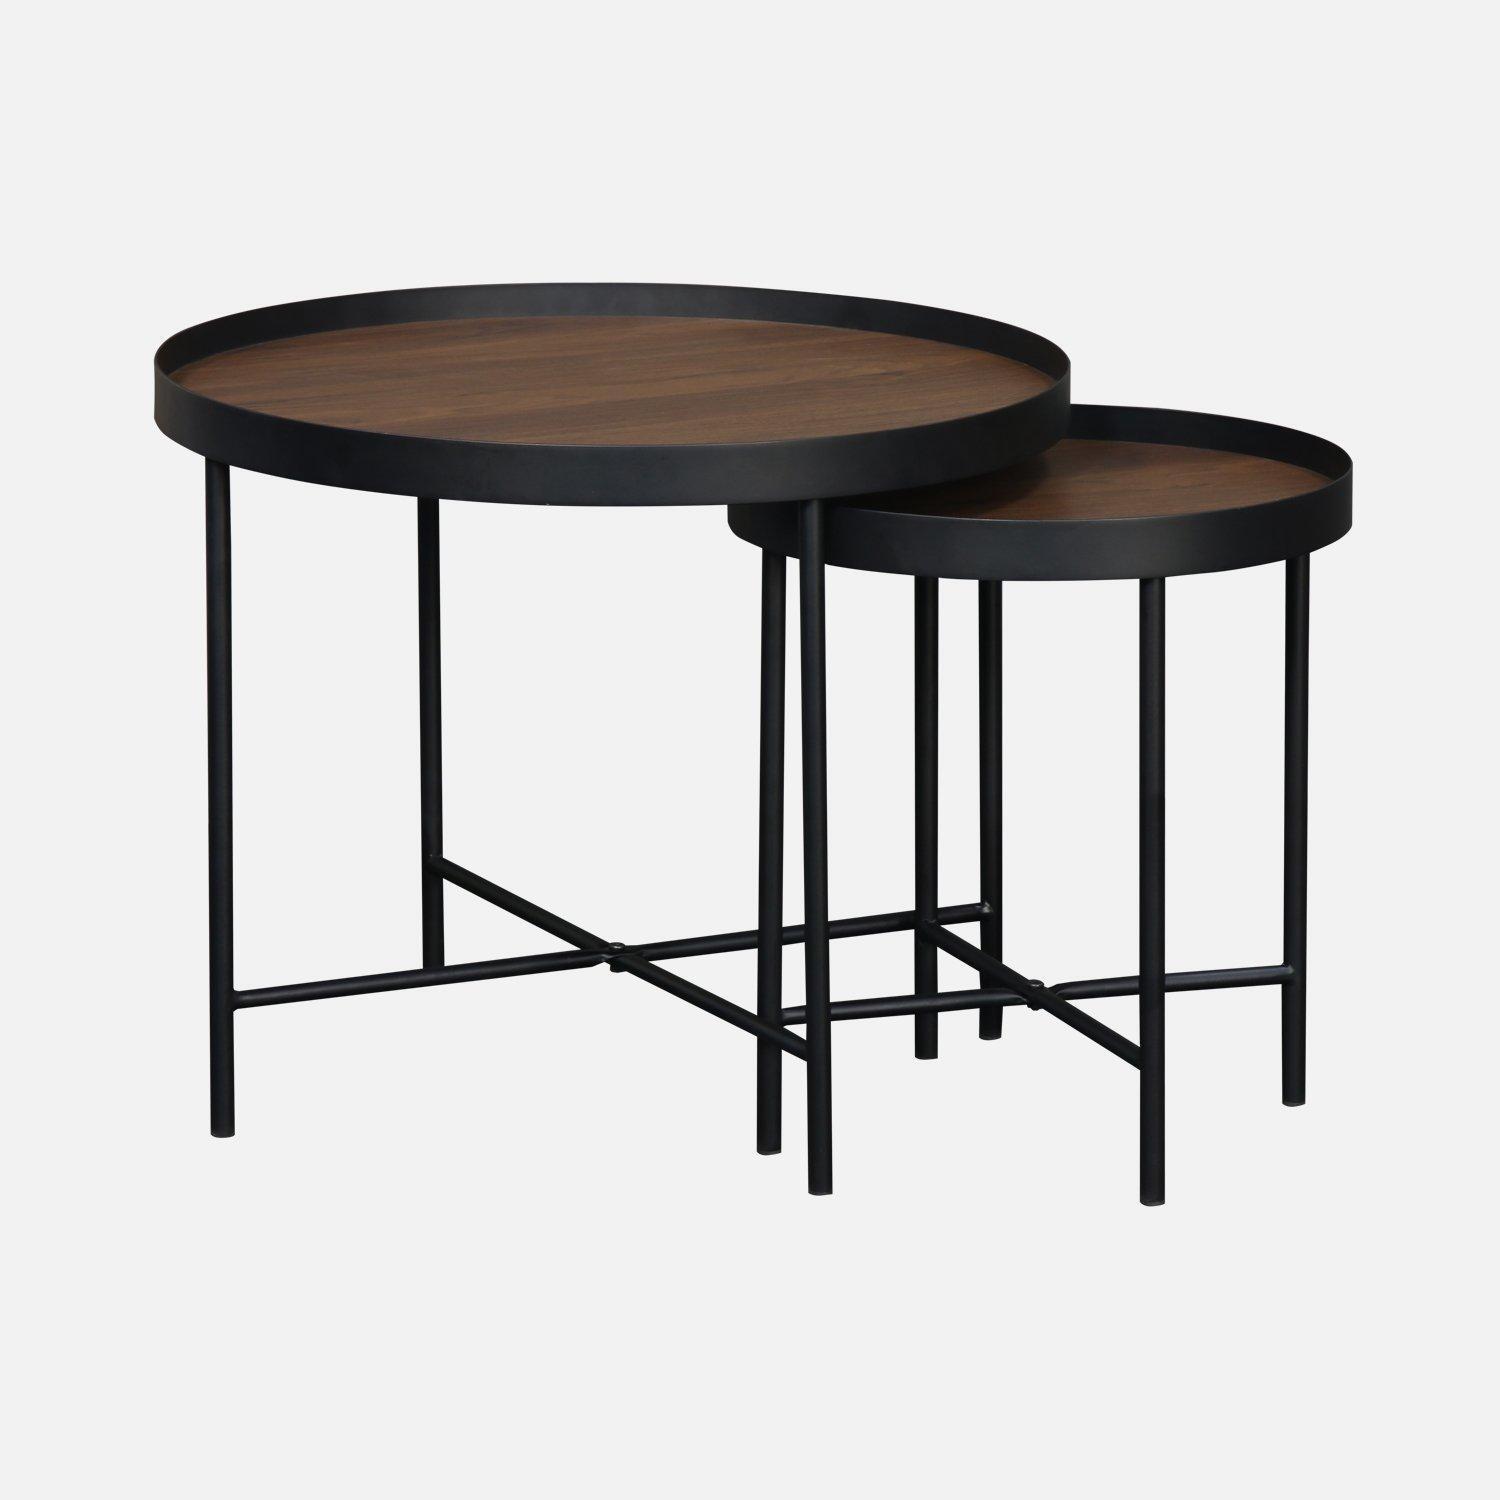 Wood-effect Round Nesting Tables - image 1